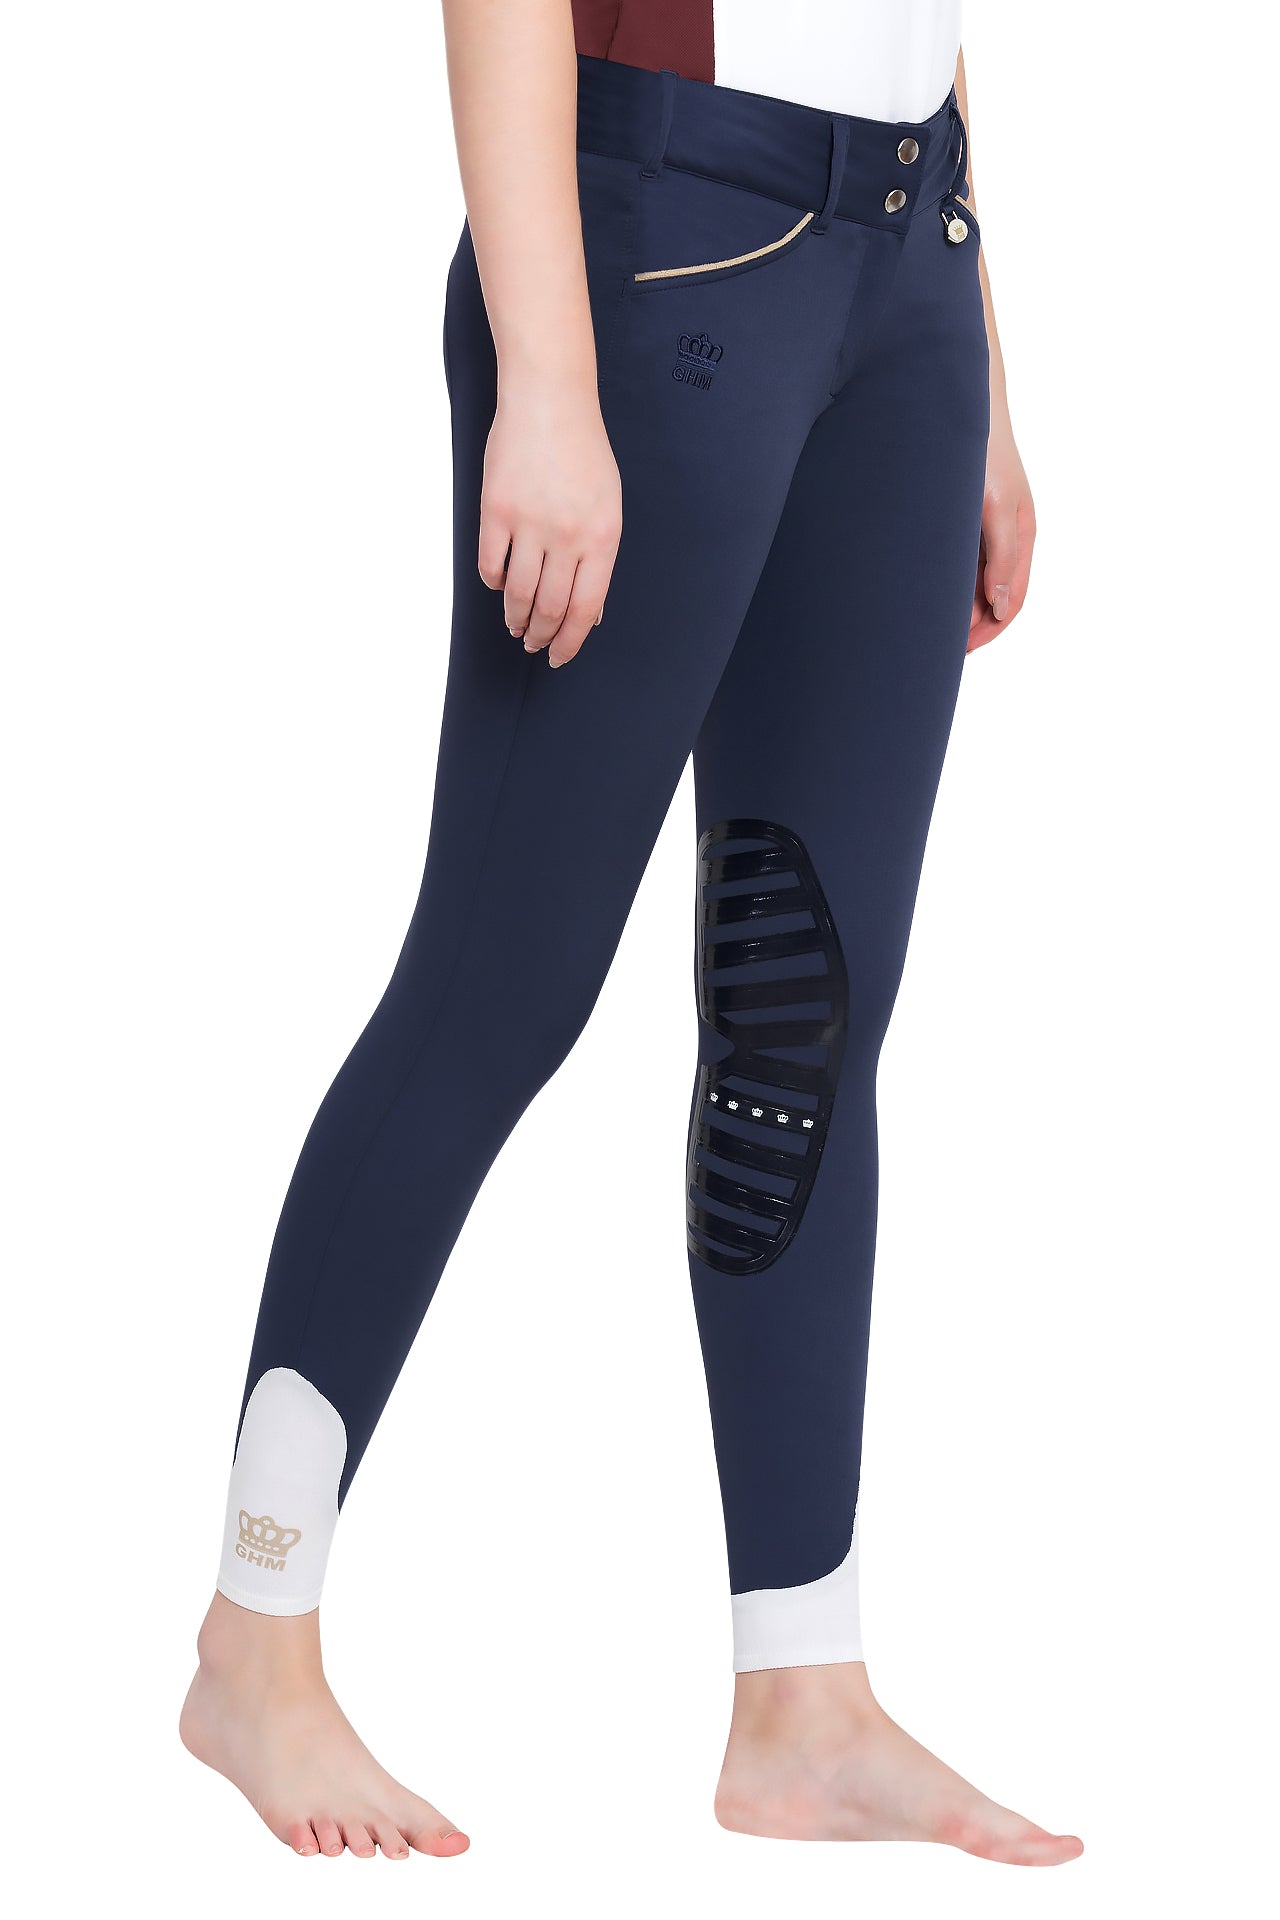 George H Morris Ladies Add Back Silicone Knee Patch Breeches - Breeches.com